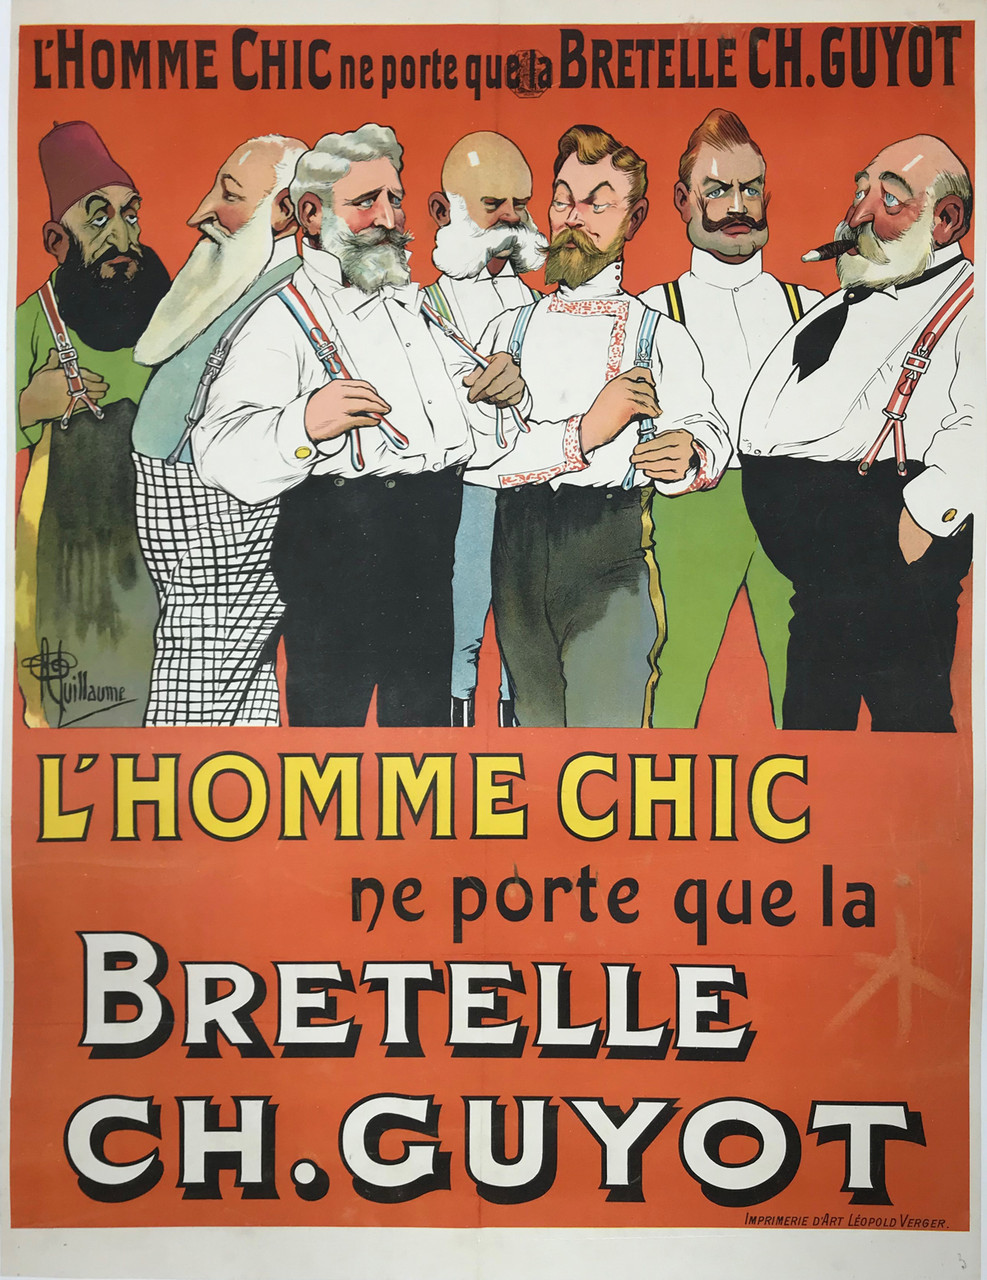 Bretelle Ch. Guyot L Homme Chic original vintage French poster product advertisement 